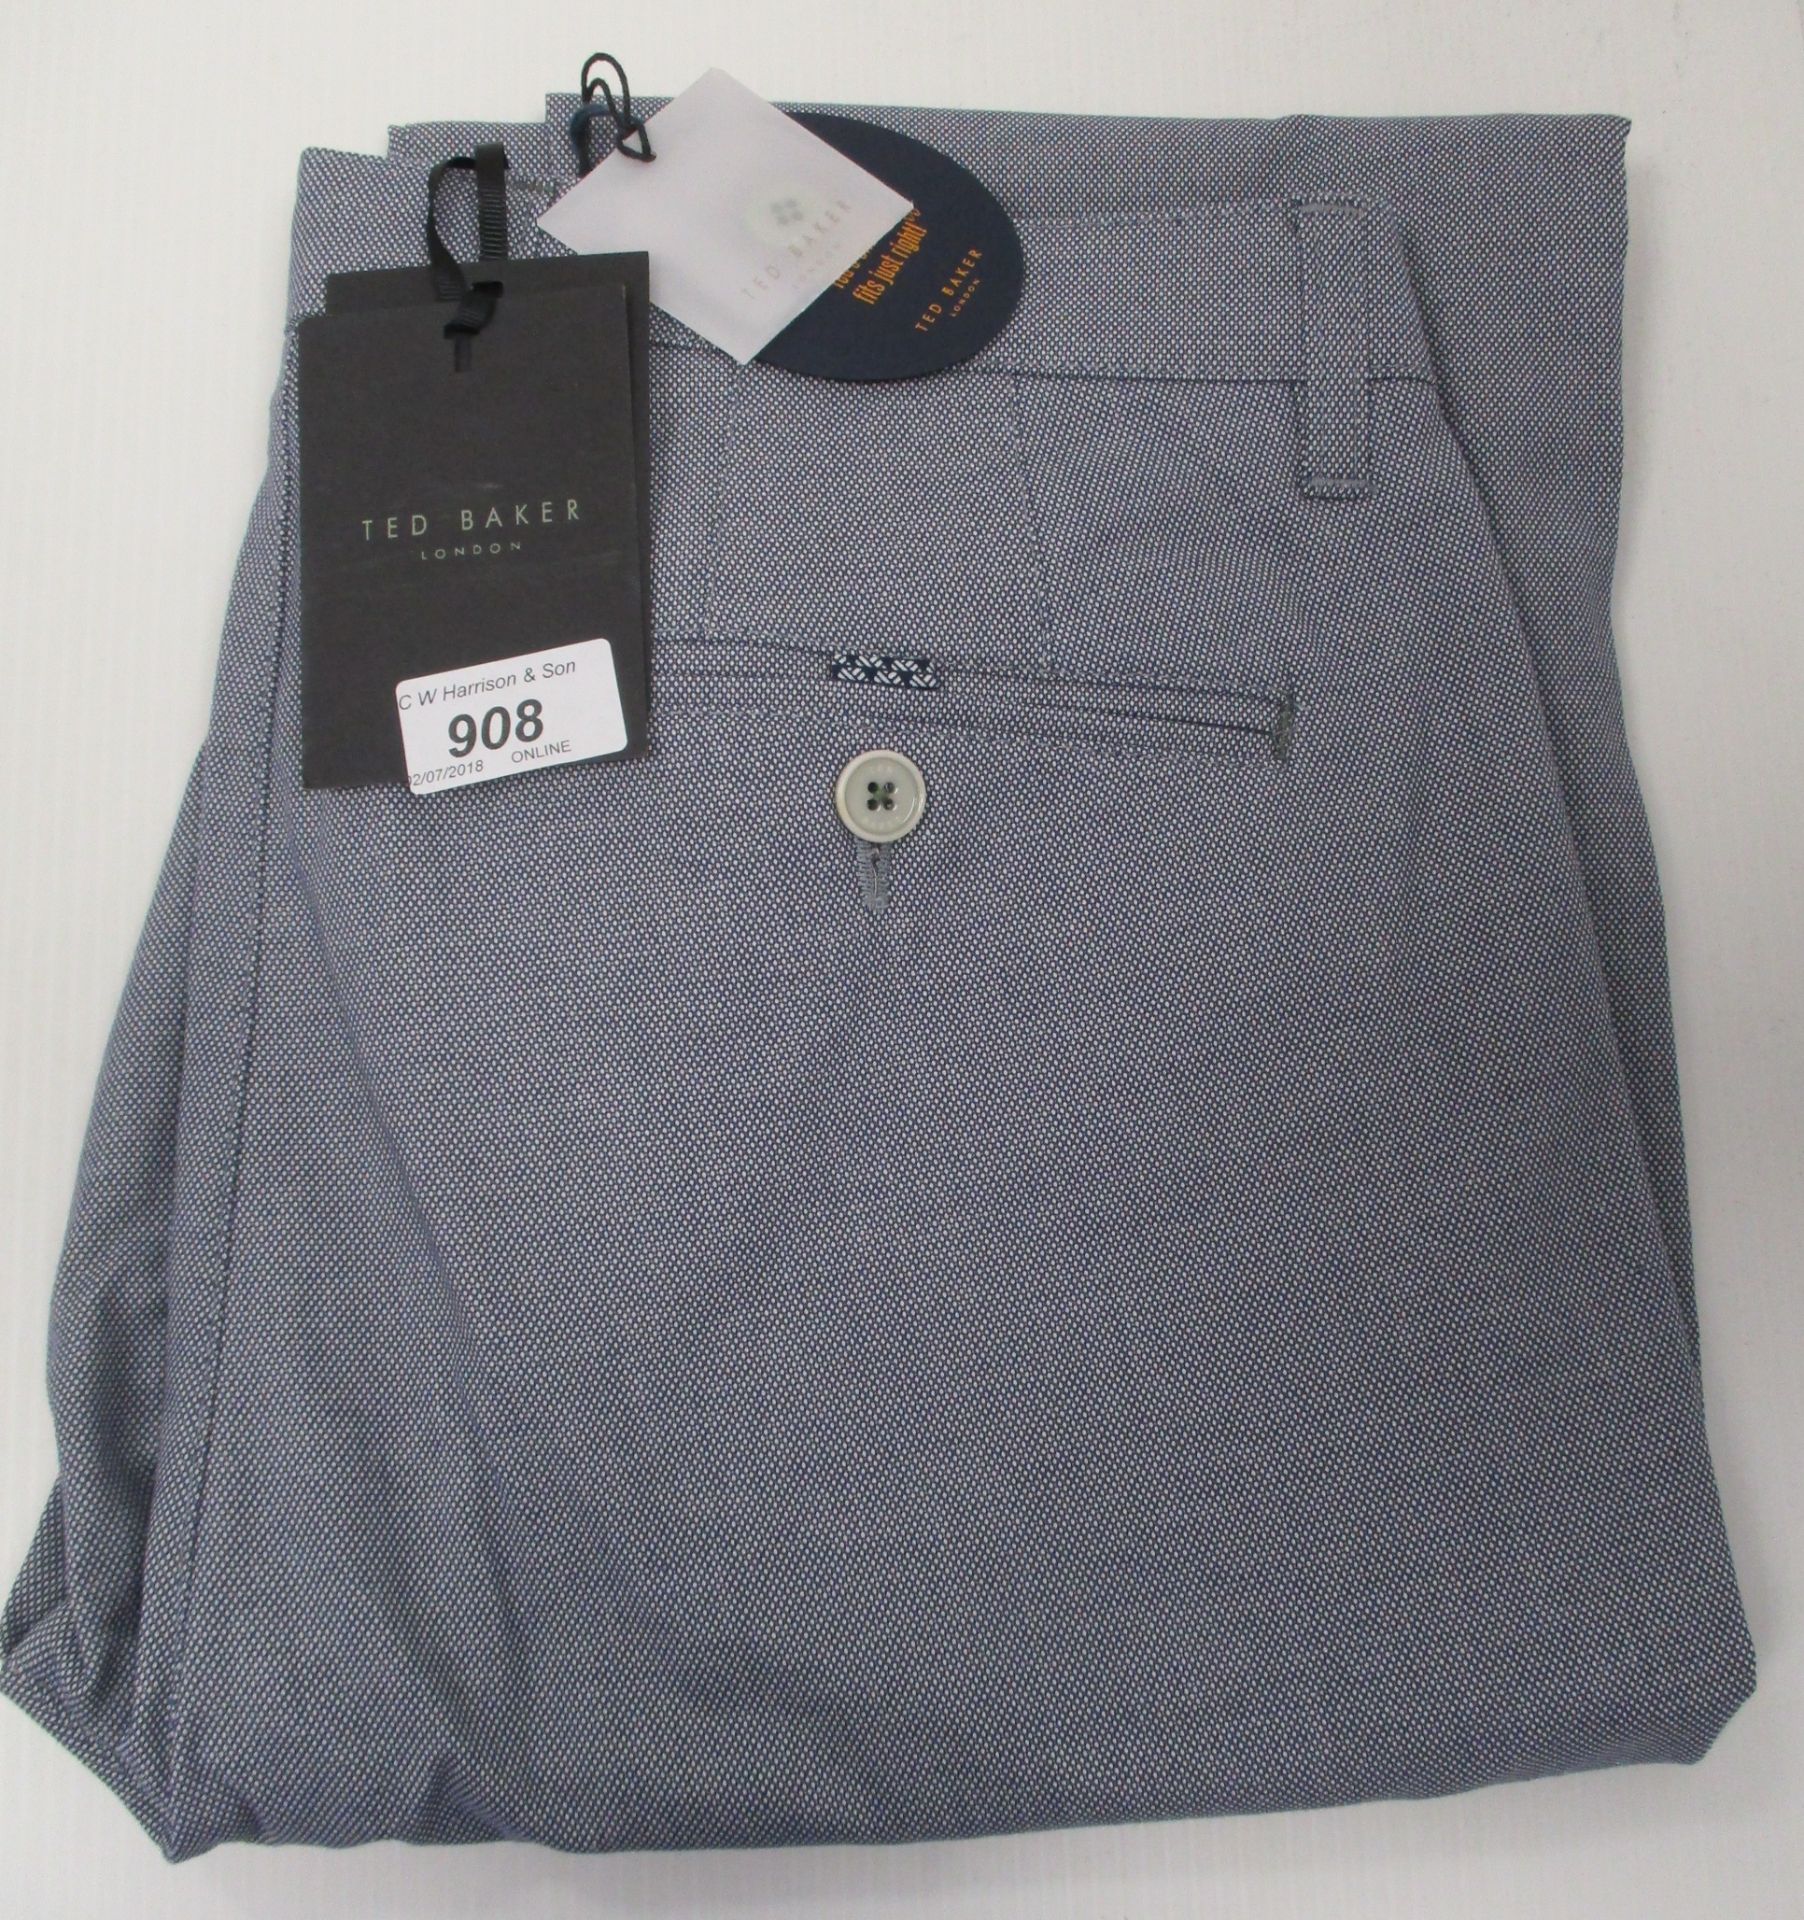 Ted Baker slim fit chino trousers - blue - 32L RRP £99